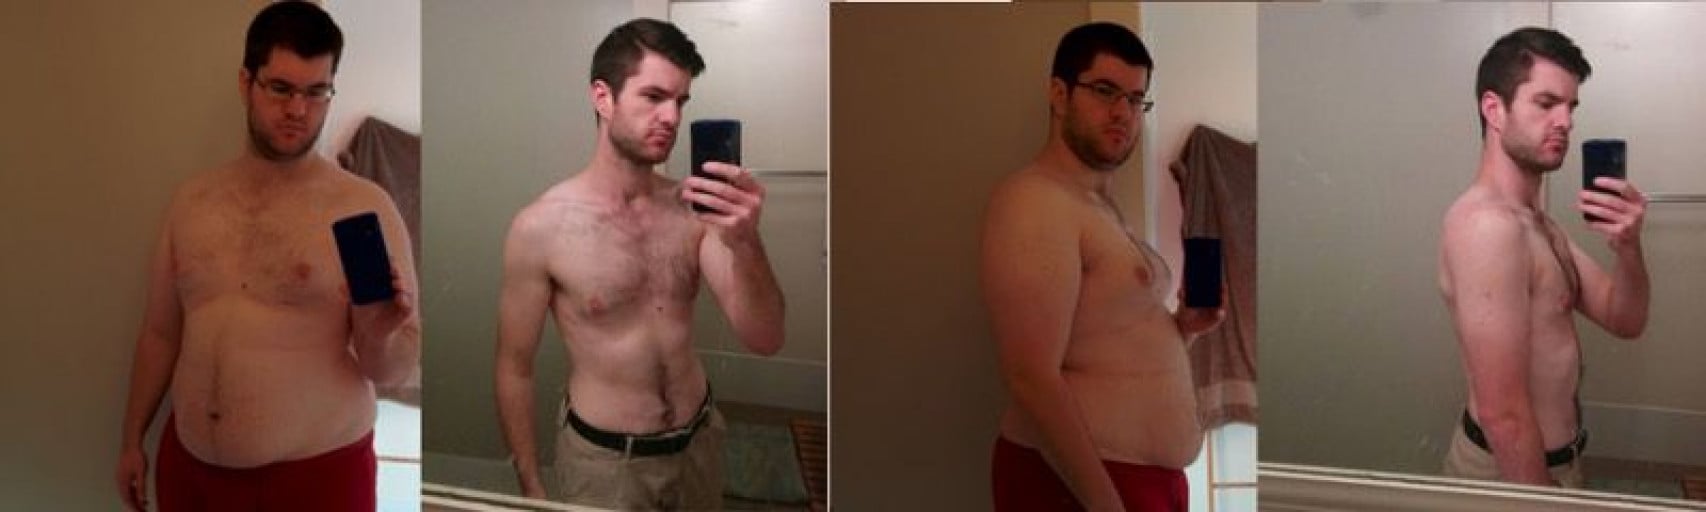 Before and After 148 lbs Weight Loss 6 foot Male 330 lbs to 182 lbs